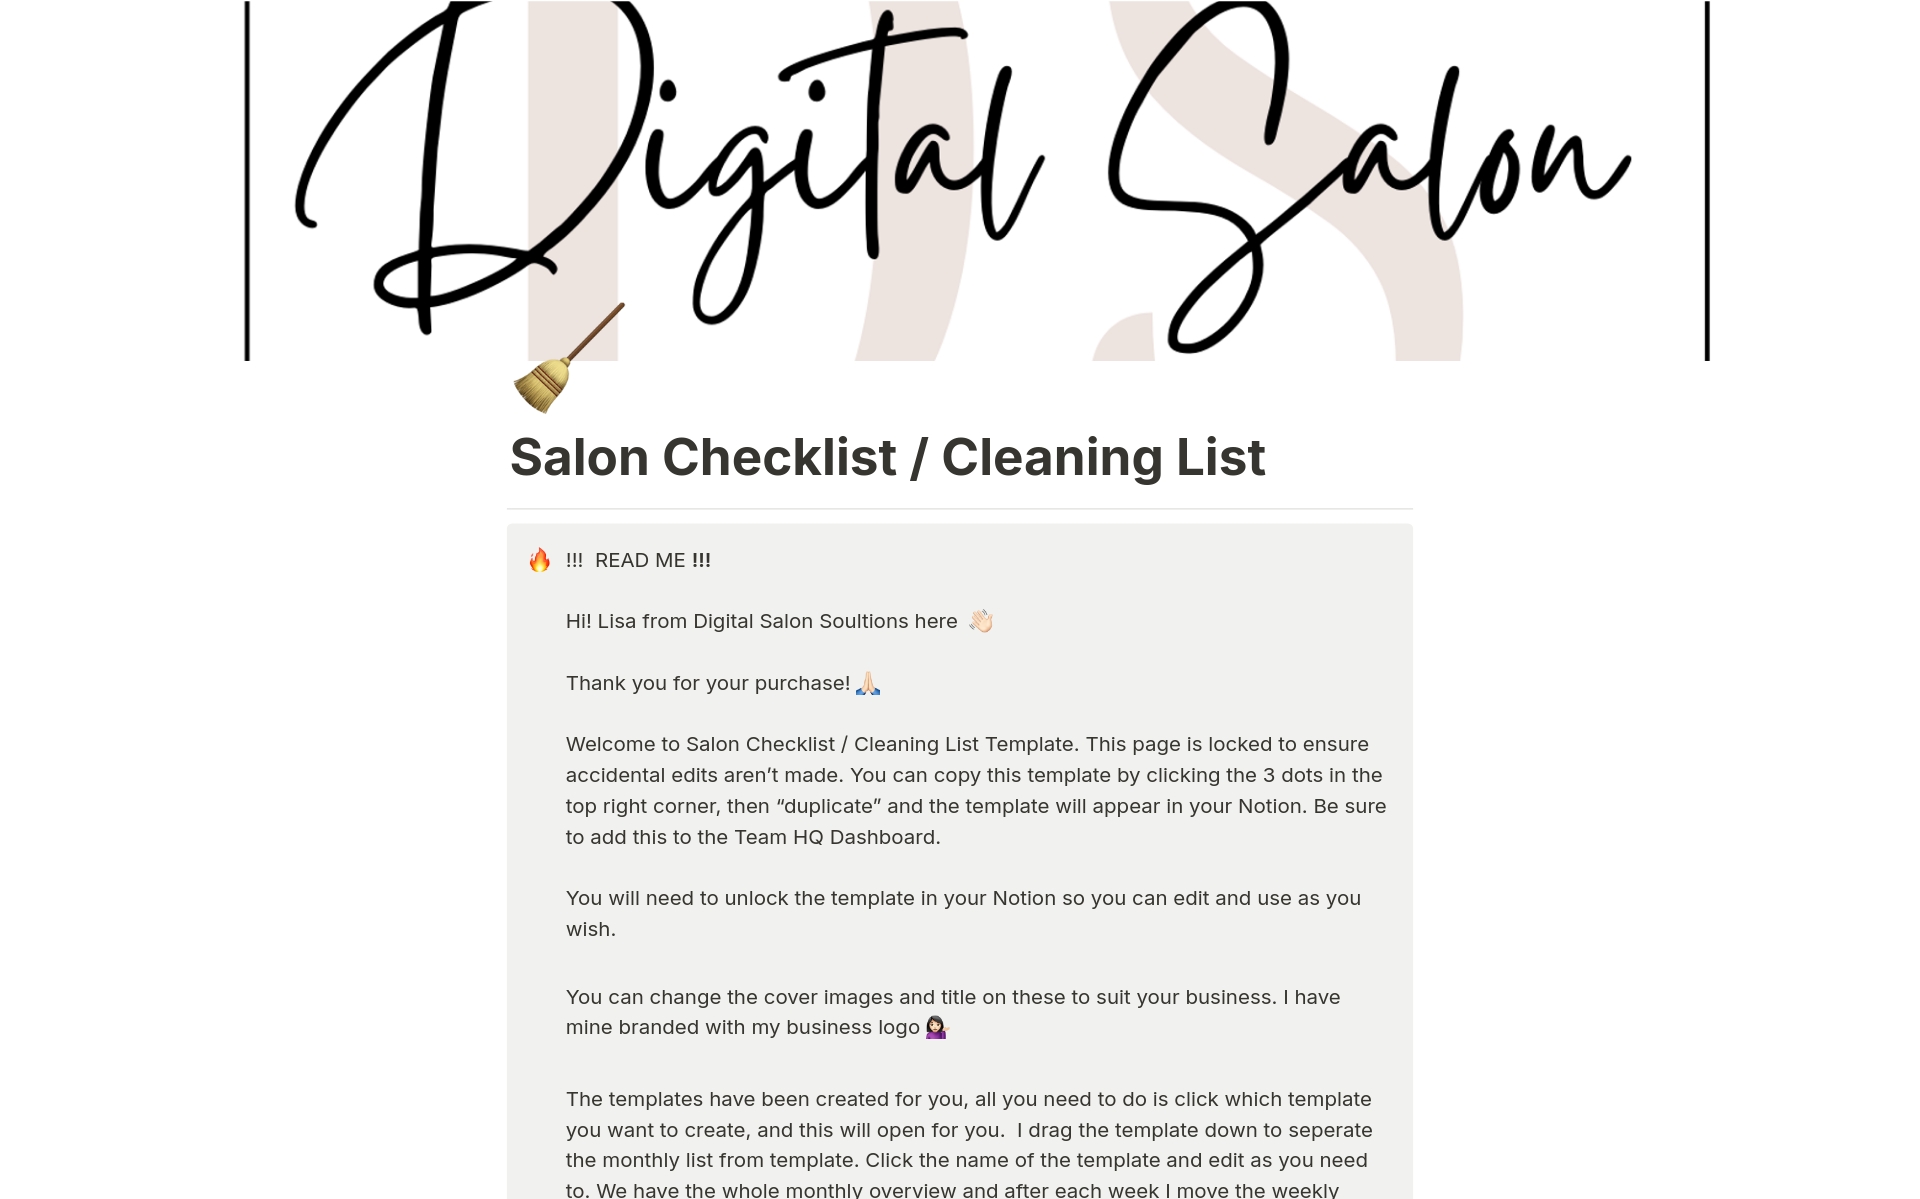 A template preview for Salon Checklist / Cleaning List